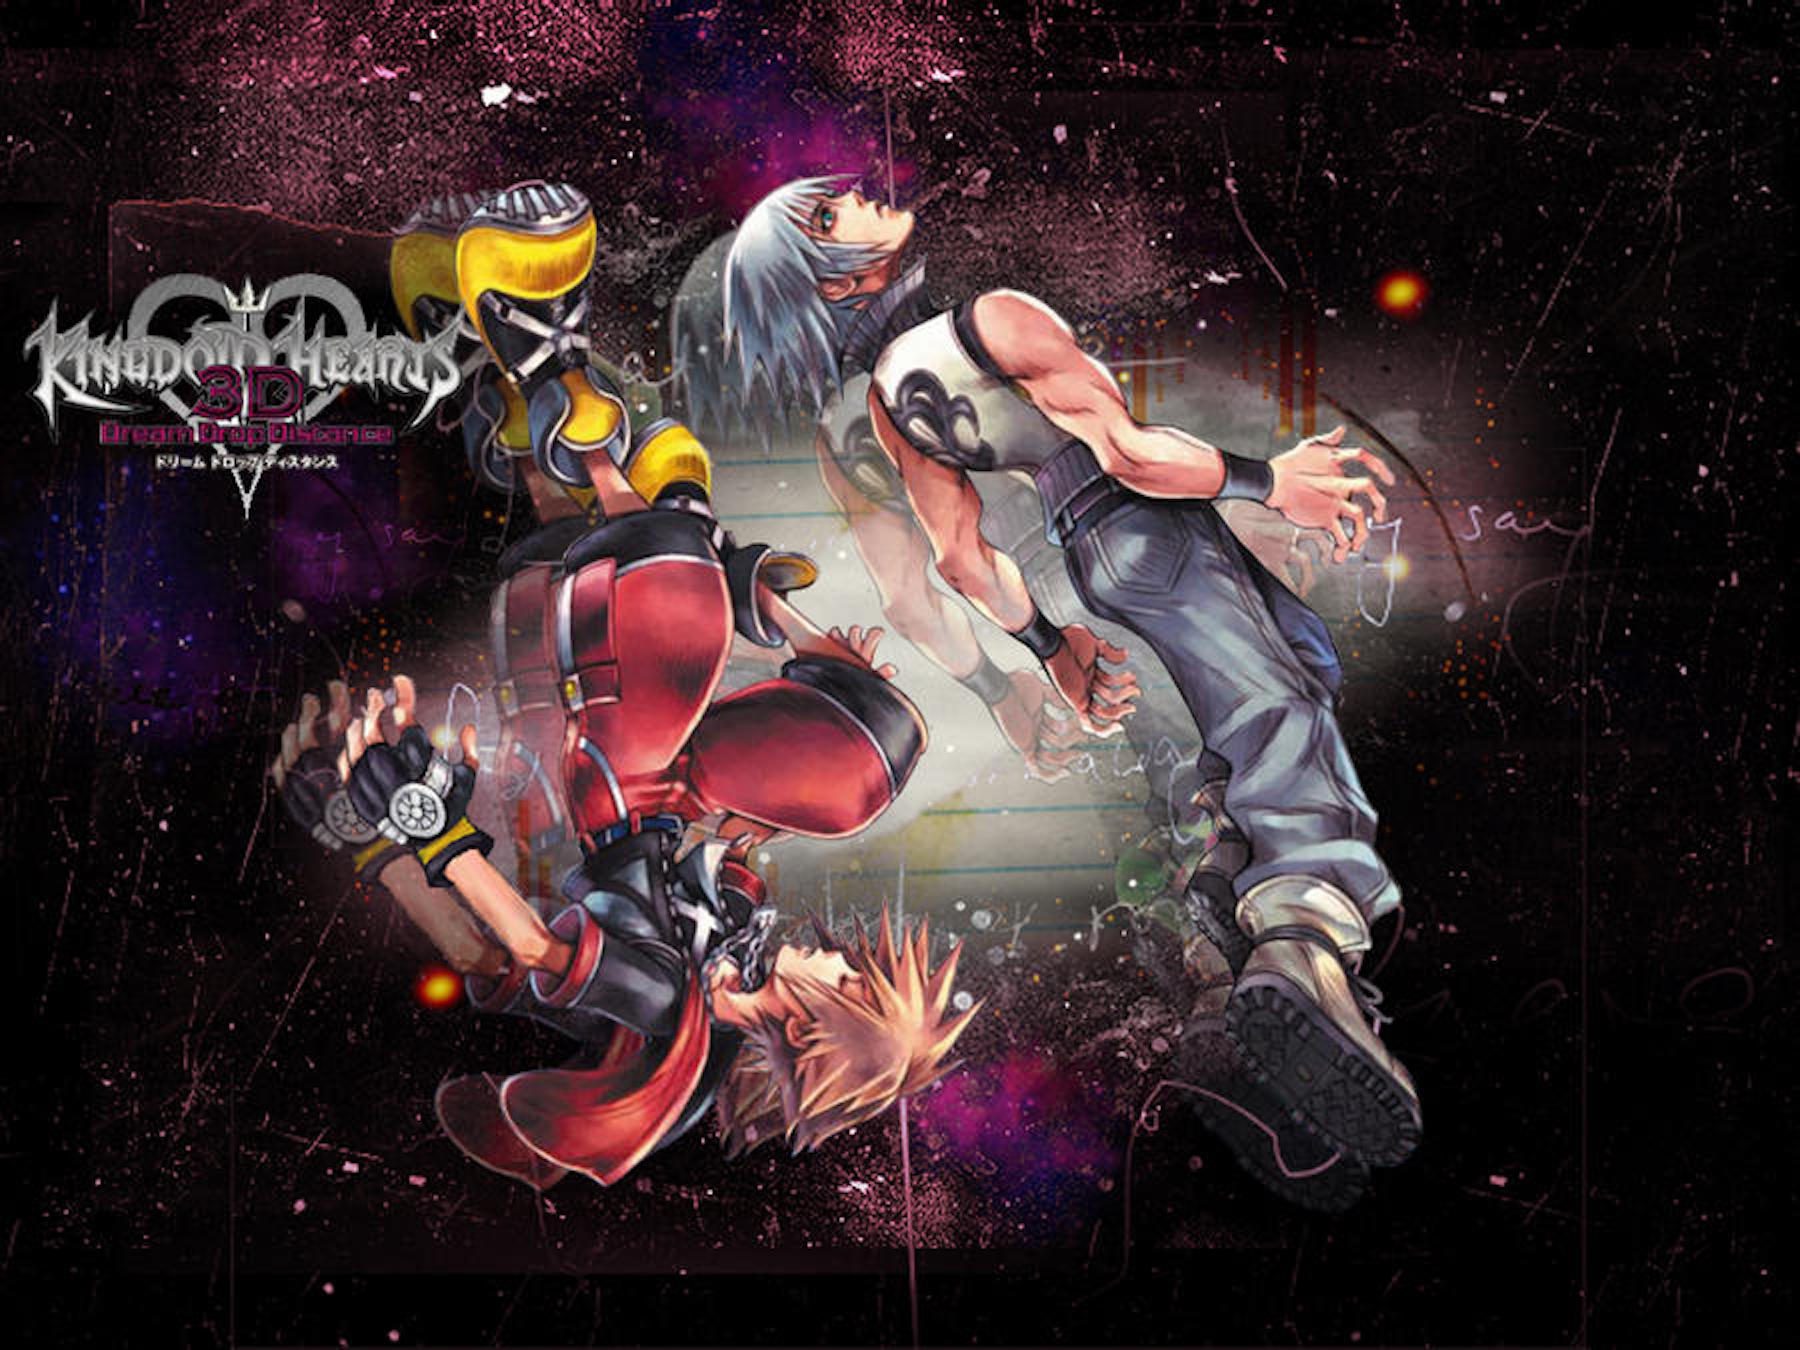 Sora and Riku suspended in darkness, artwork for Kingdom Hearts: Dream Drop Distance.